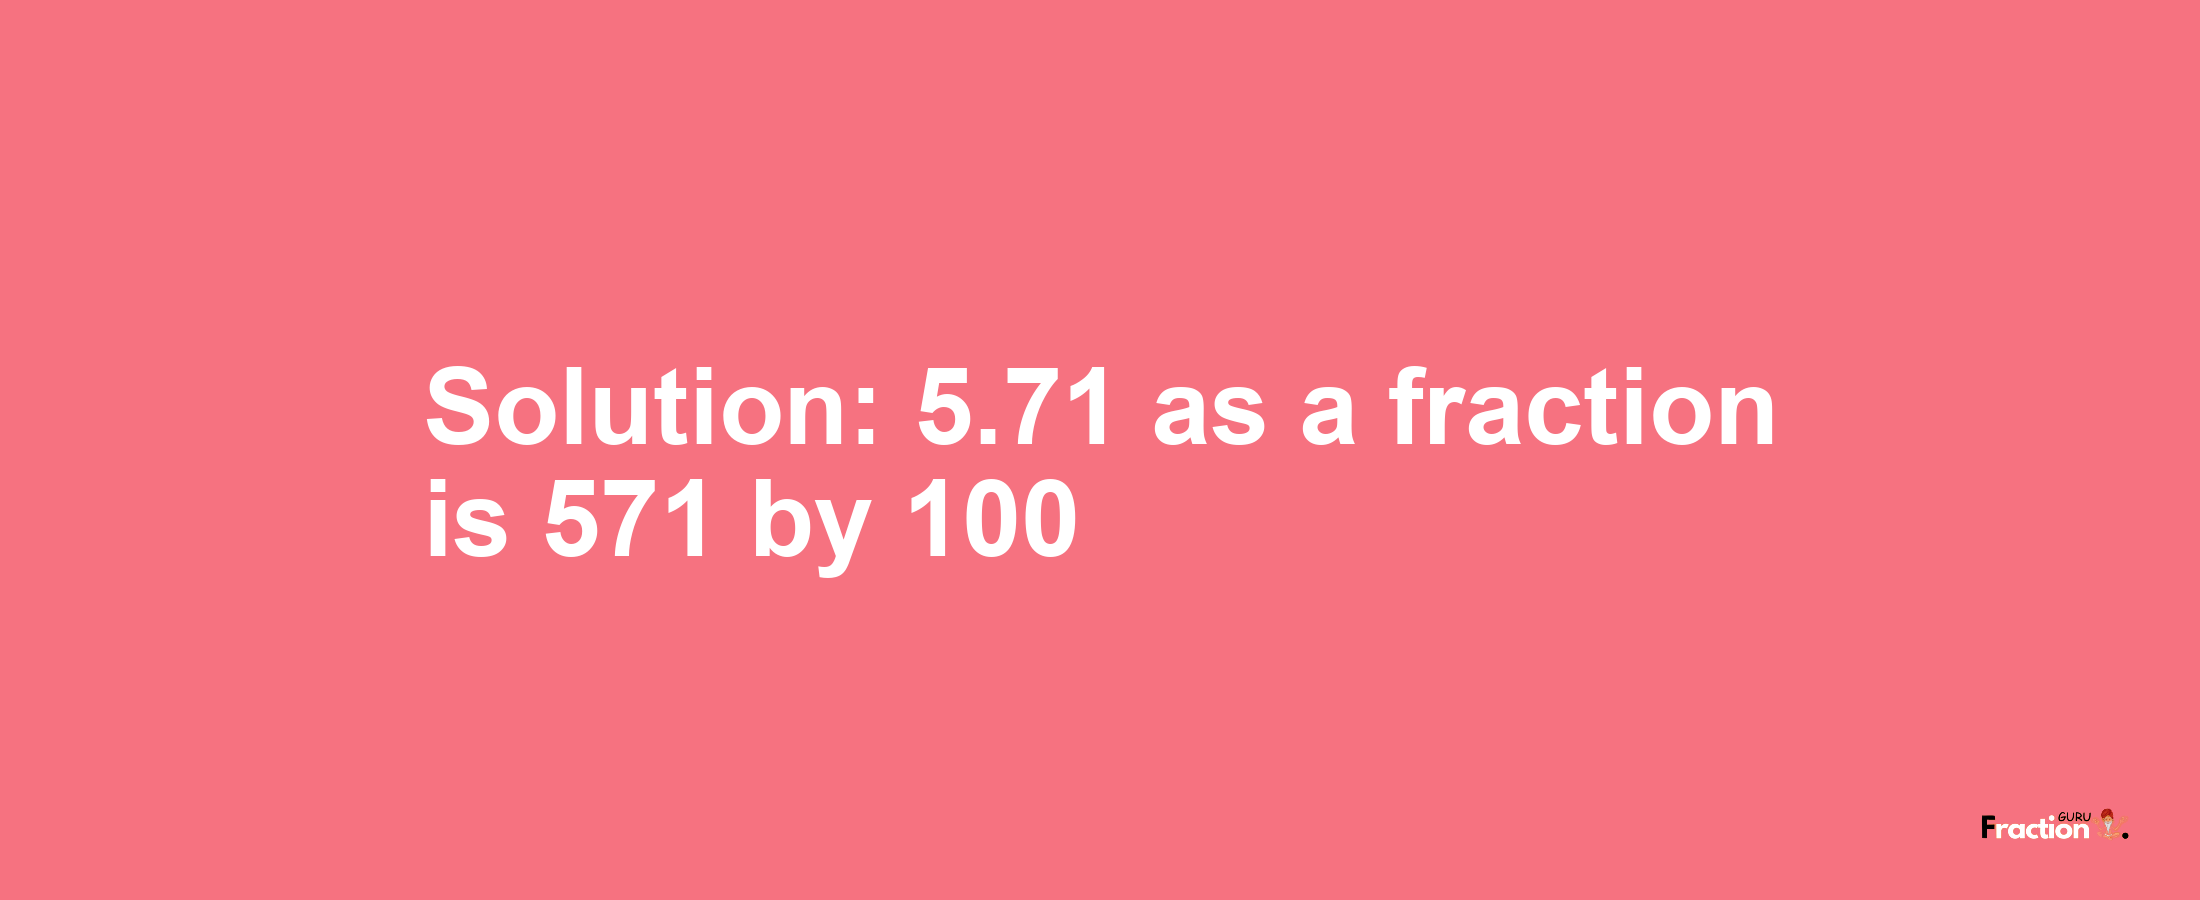 Solution:5.71 as a fraction is 571/100